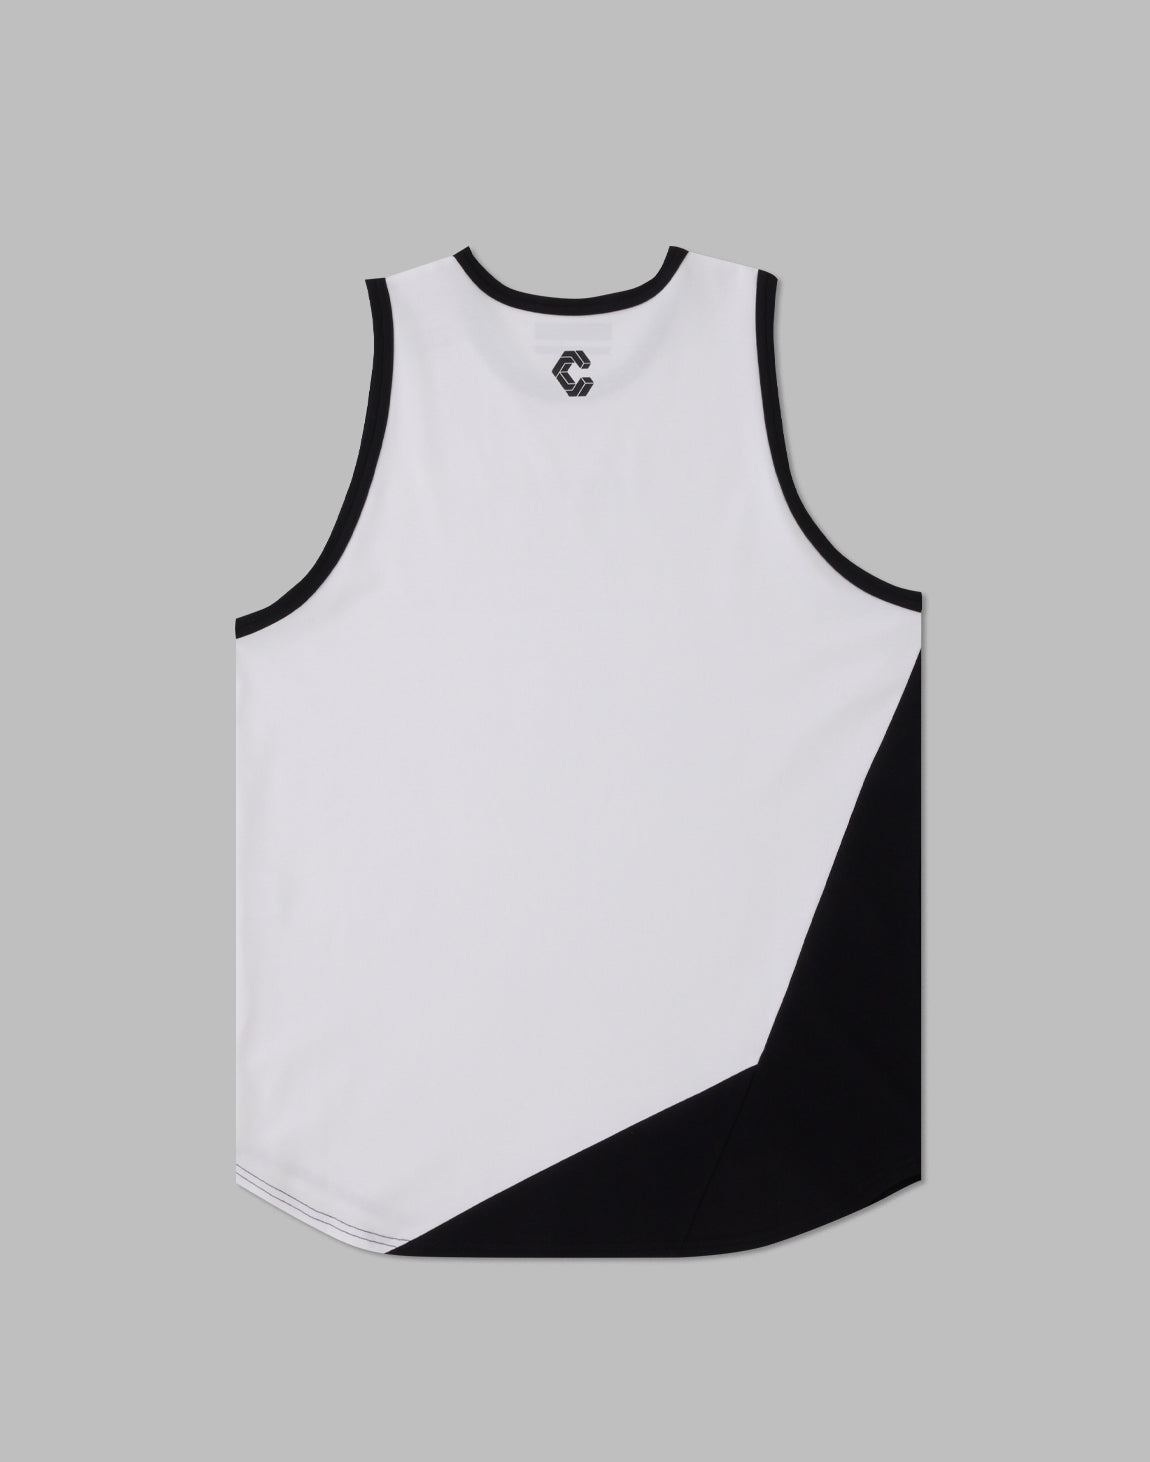 CRONOS DRYTOUCH TANKTOP – クロノス CRONOS Official Store